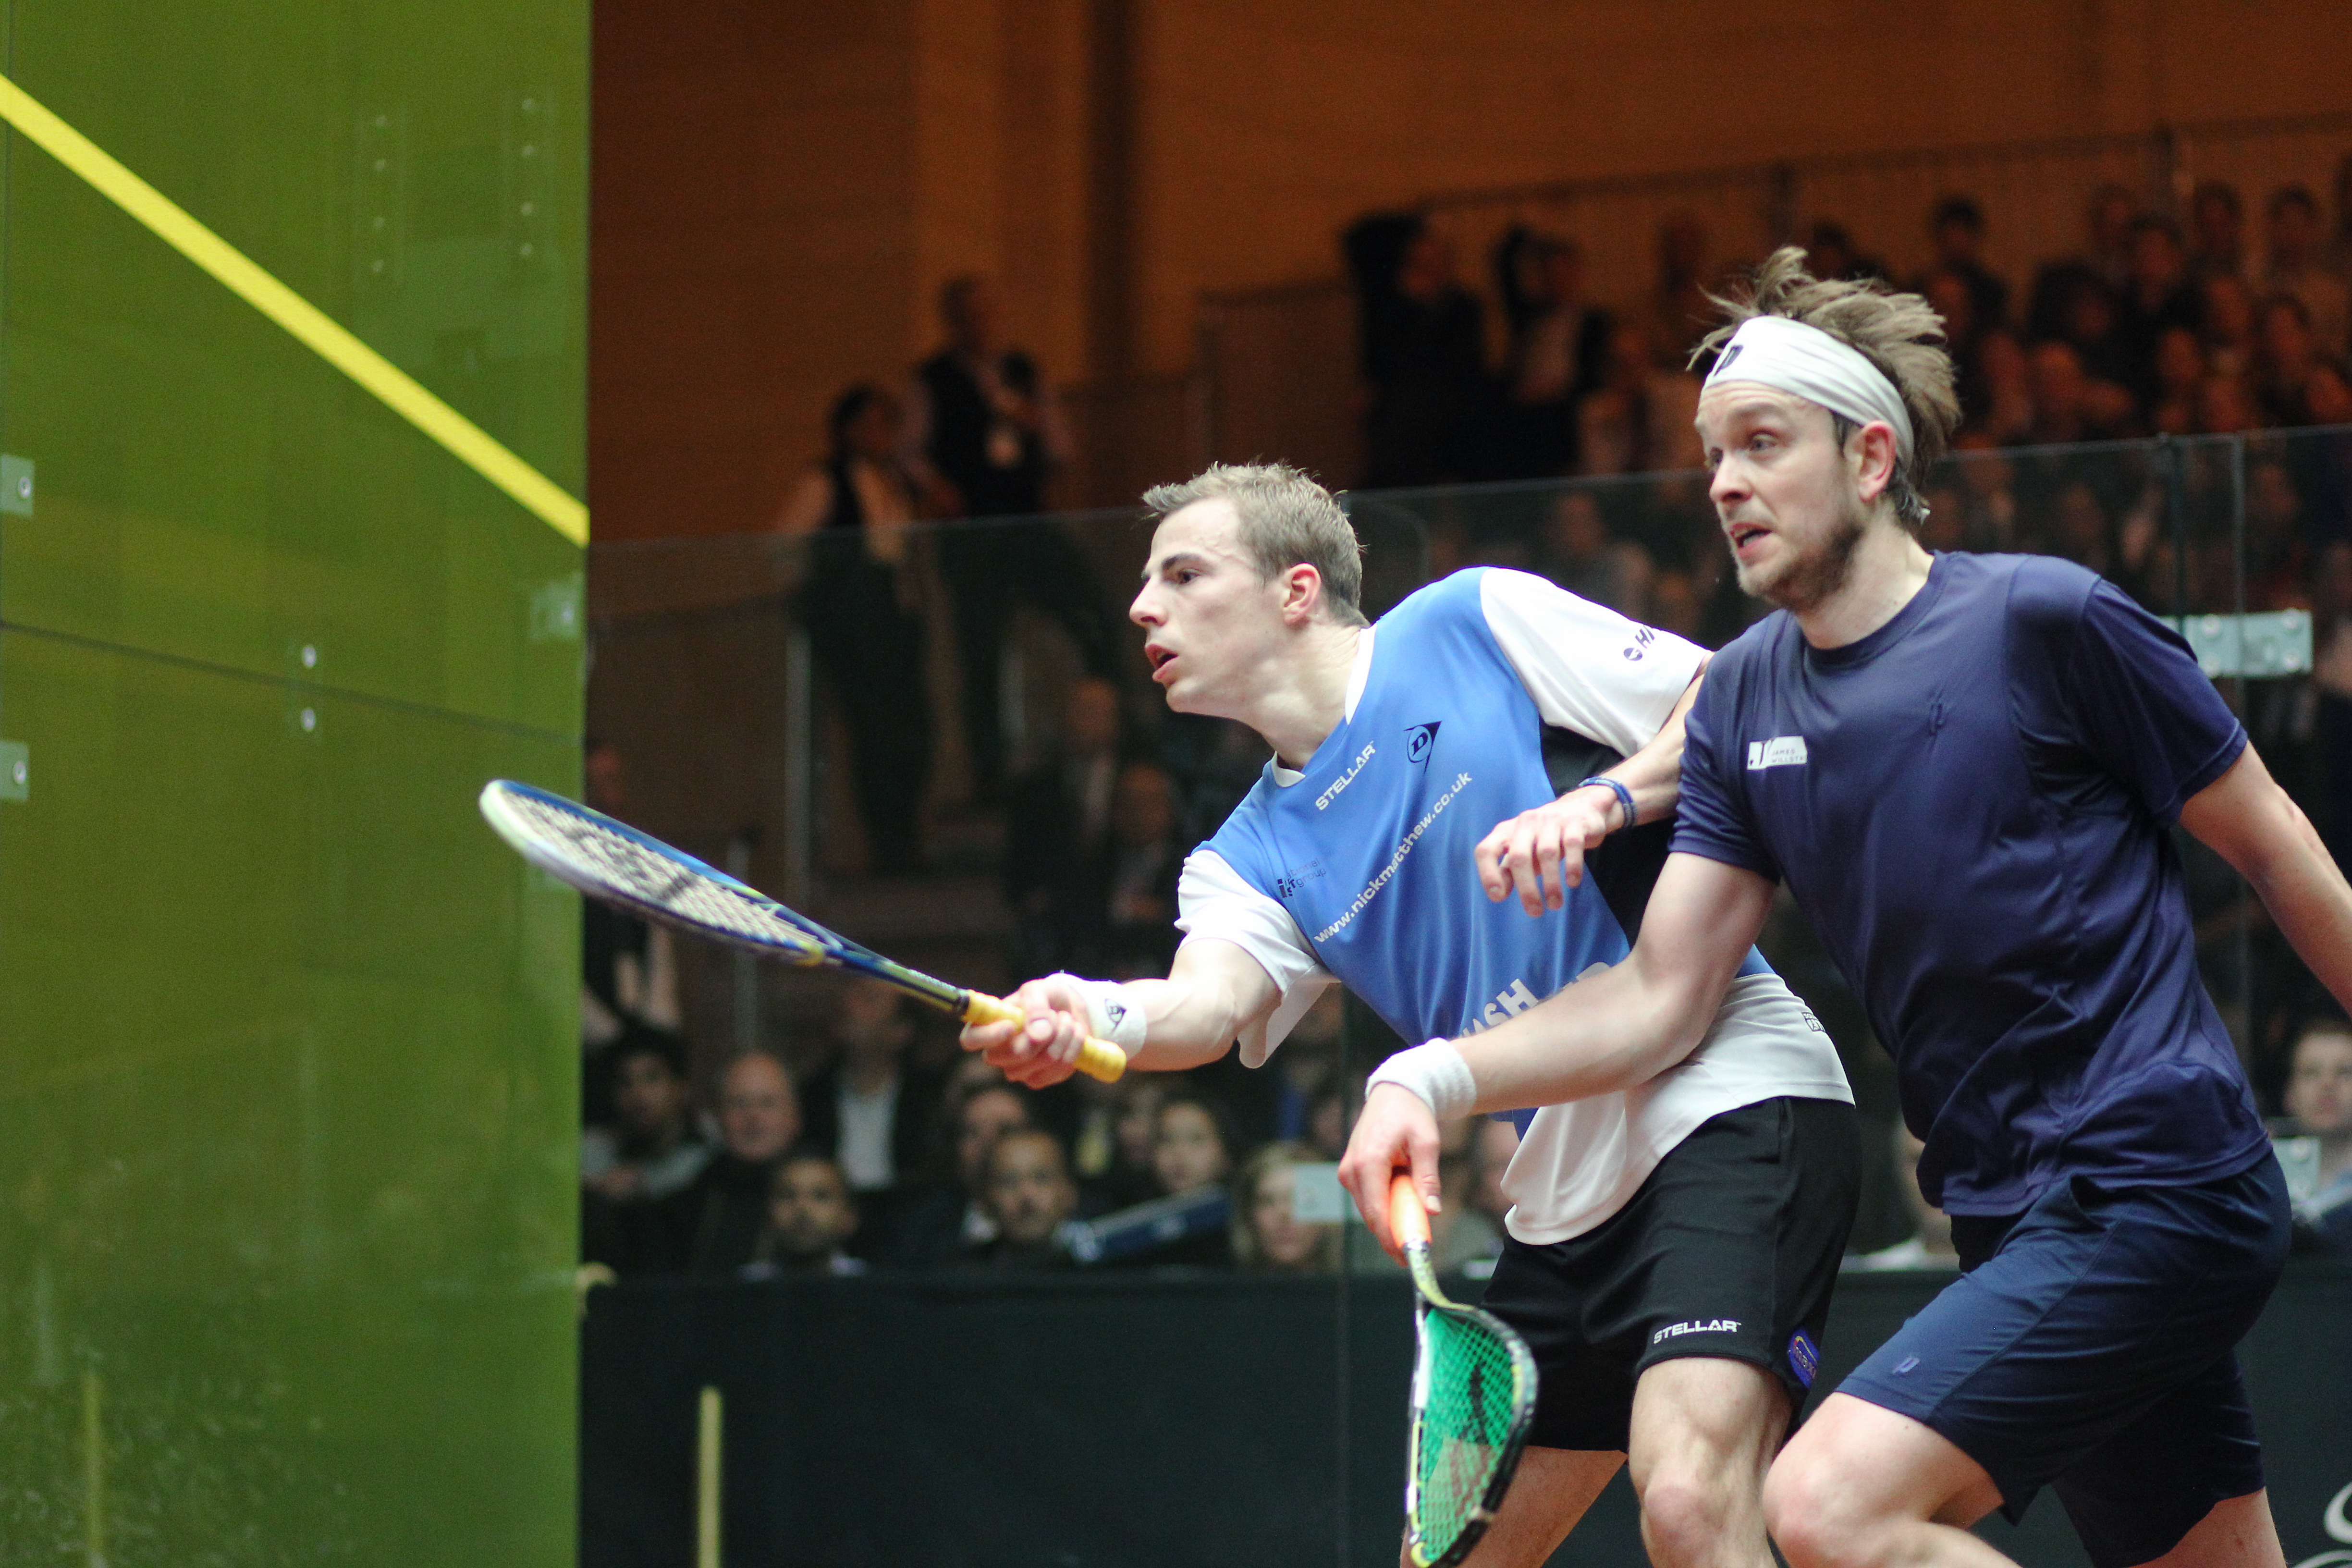 For nearly twenty years, these two Yorkshiremen have battled on squash courts around England and around the world. In the past four years, Nick Matthew (L) has had the better of James Willstrop, including at the 2012 J.P. Morgan Tournament of Champions.